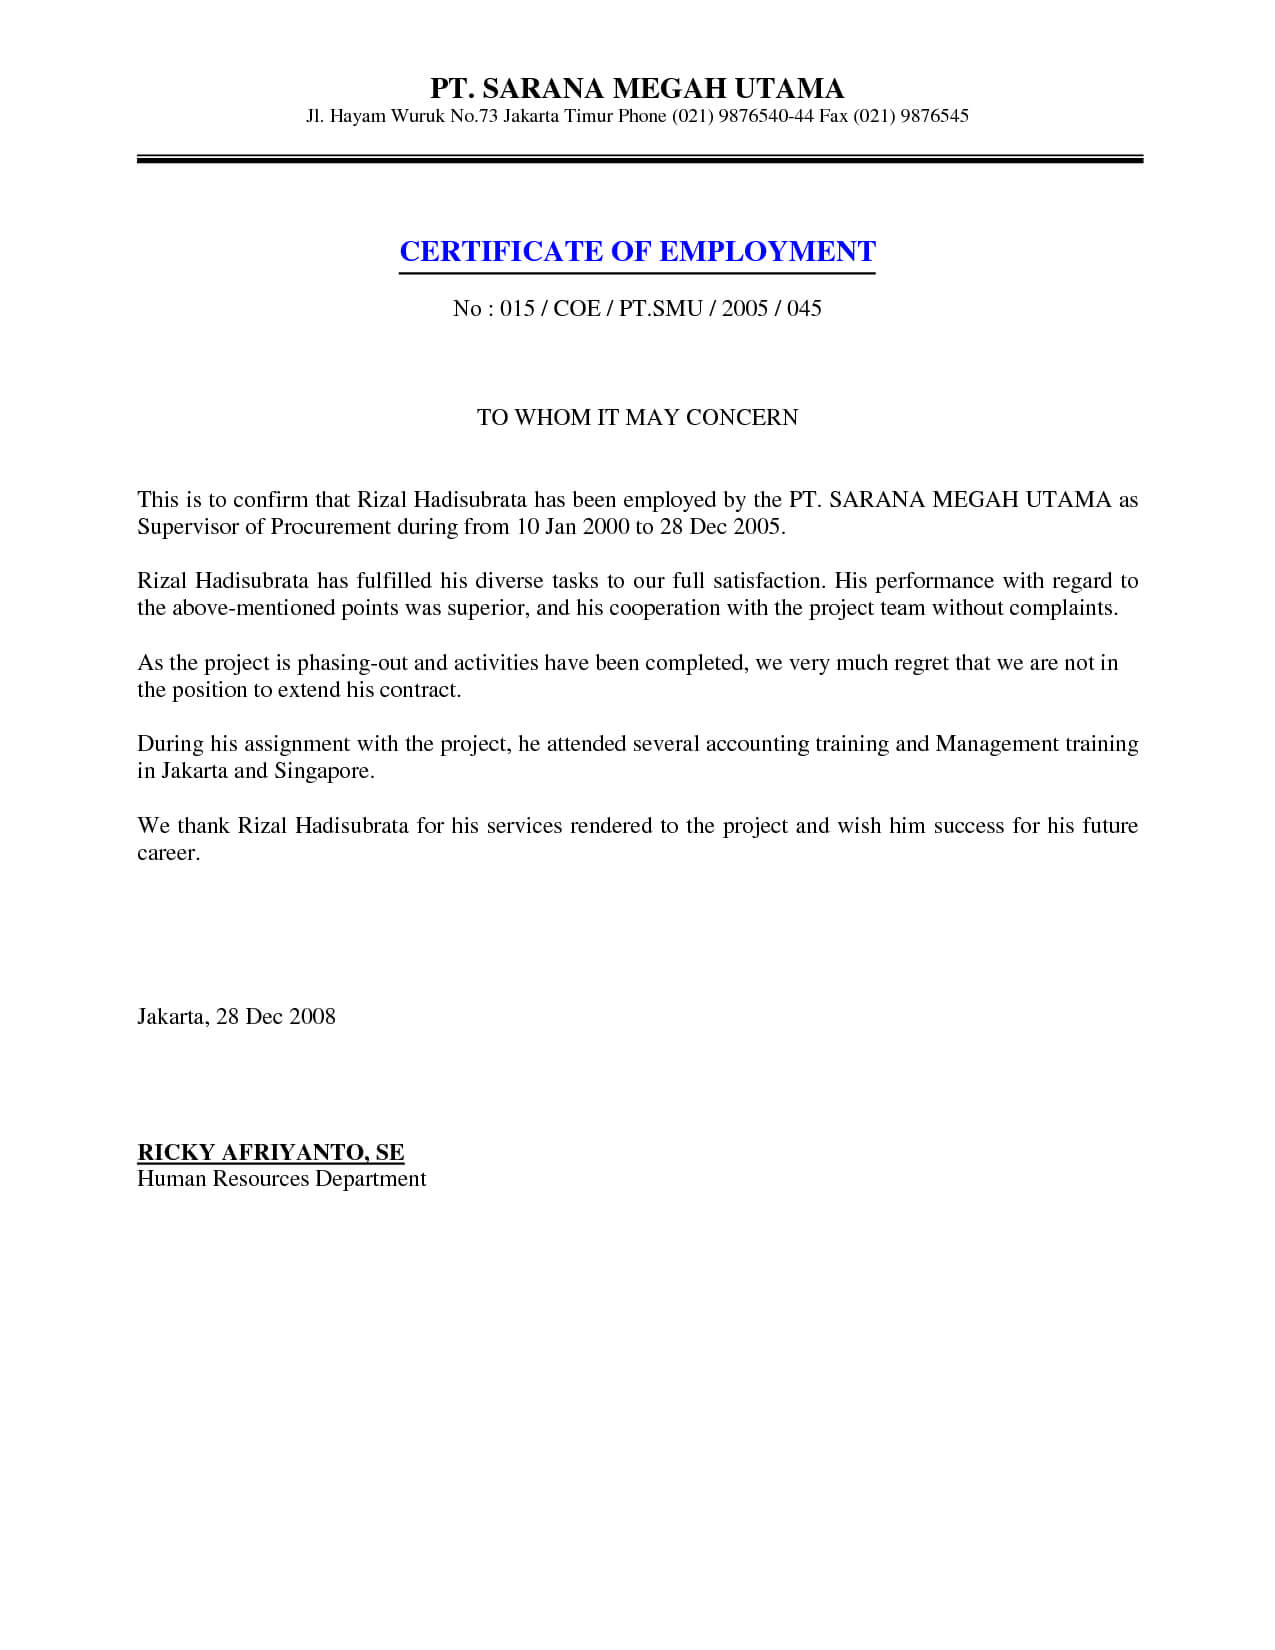 Job Employment Certificate Sample Certification Letter Within Practical Completion Certificate Template Uk